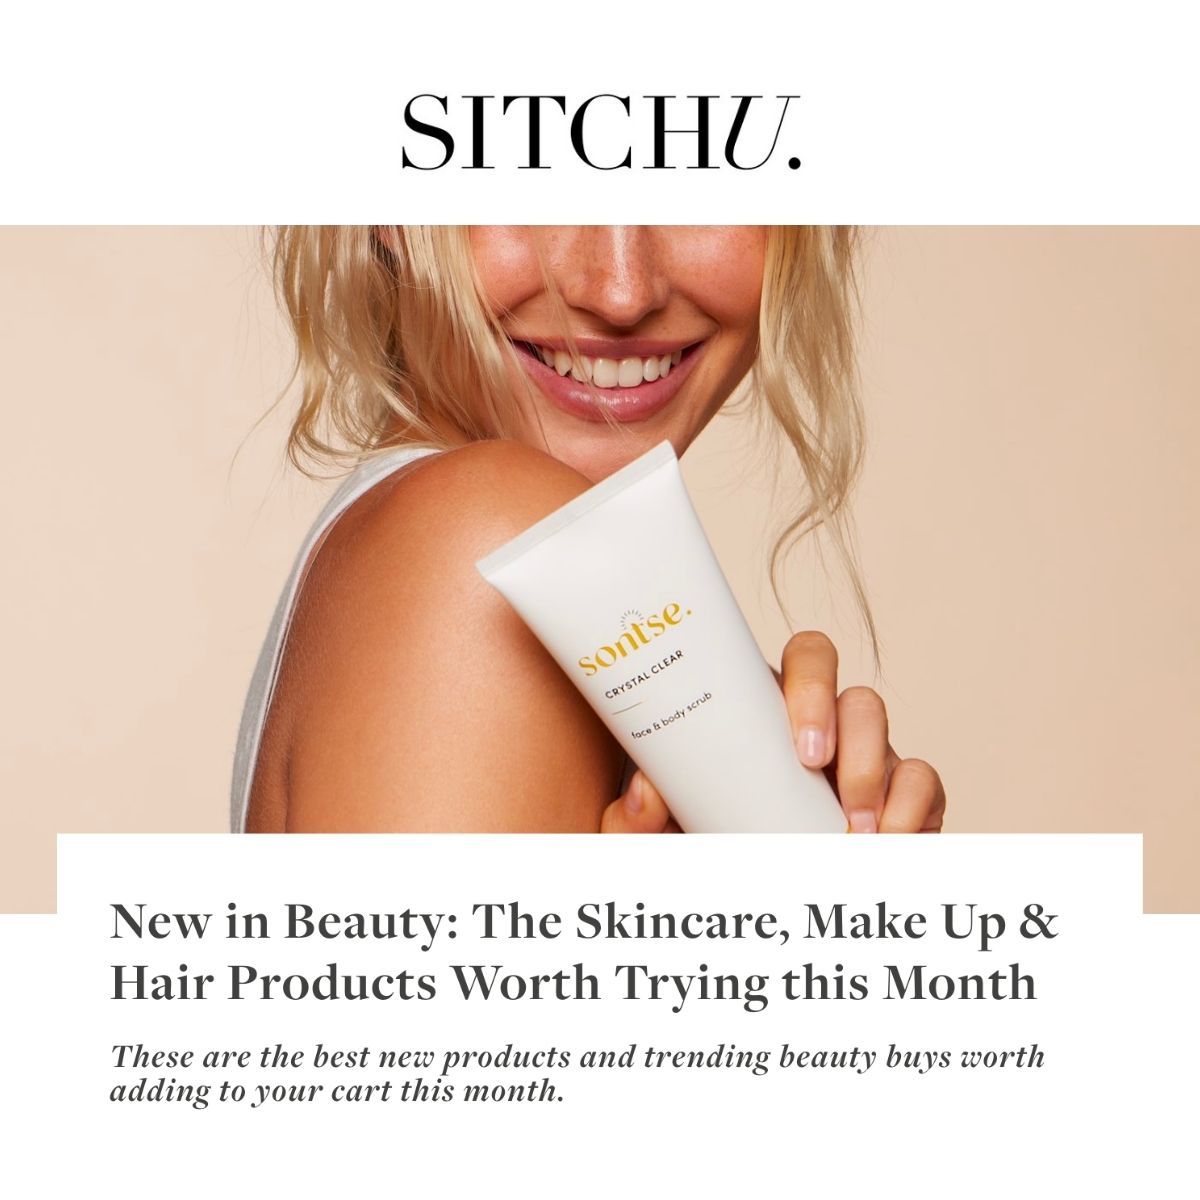 New in Beauty: The Skincare, Make Up & Hair Products Worth Trying this Month